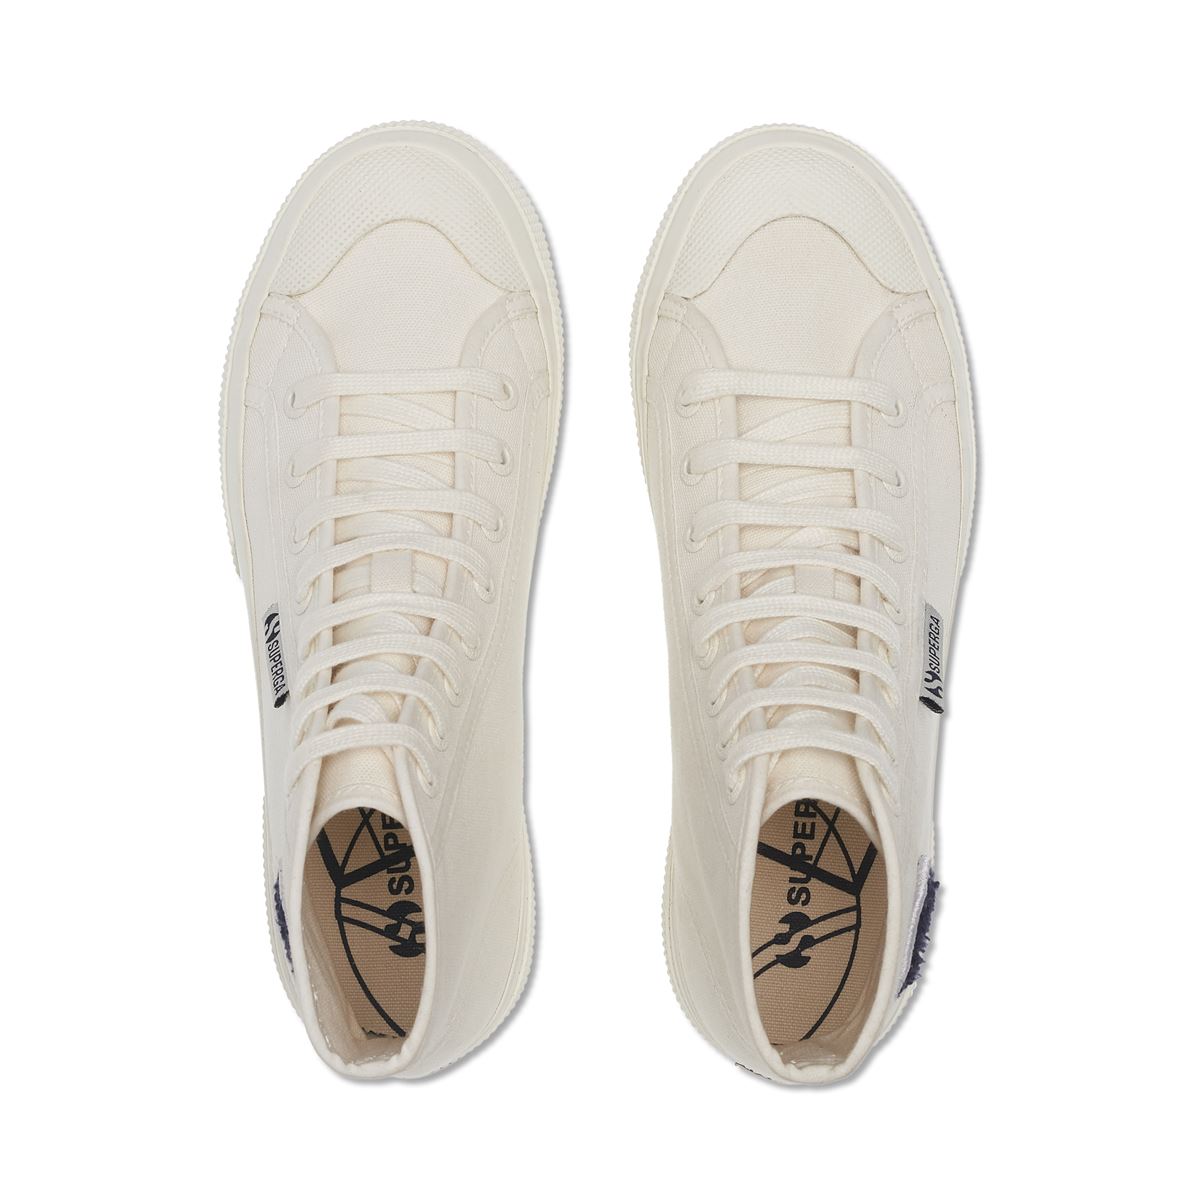 Superga 2295 Cotton Terry Patch High Top Sneakers - White Avorio Navy. Top view.